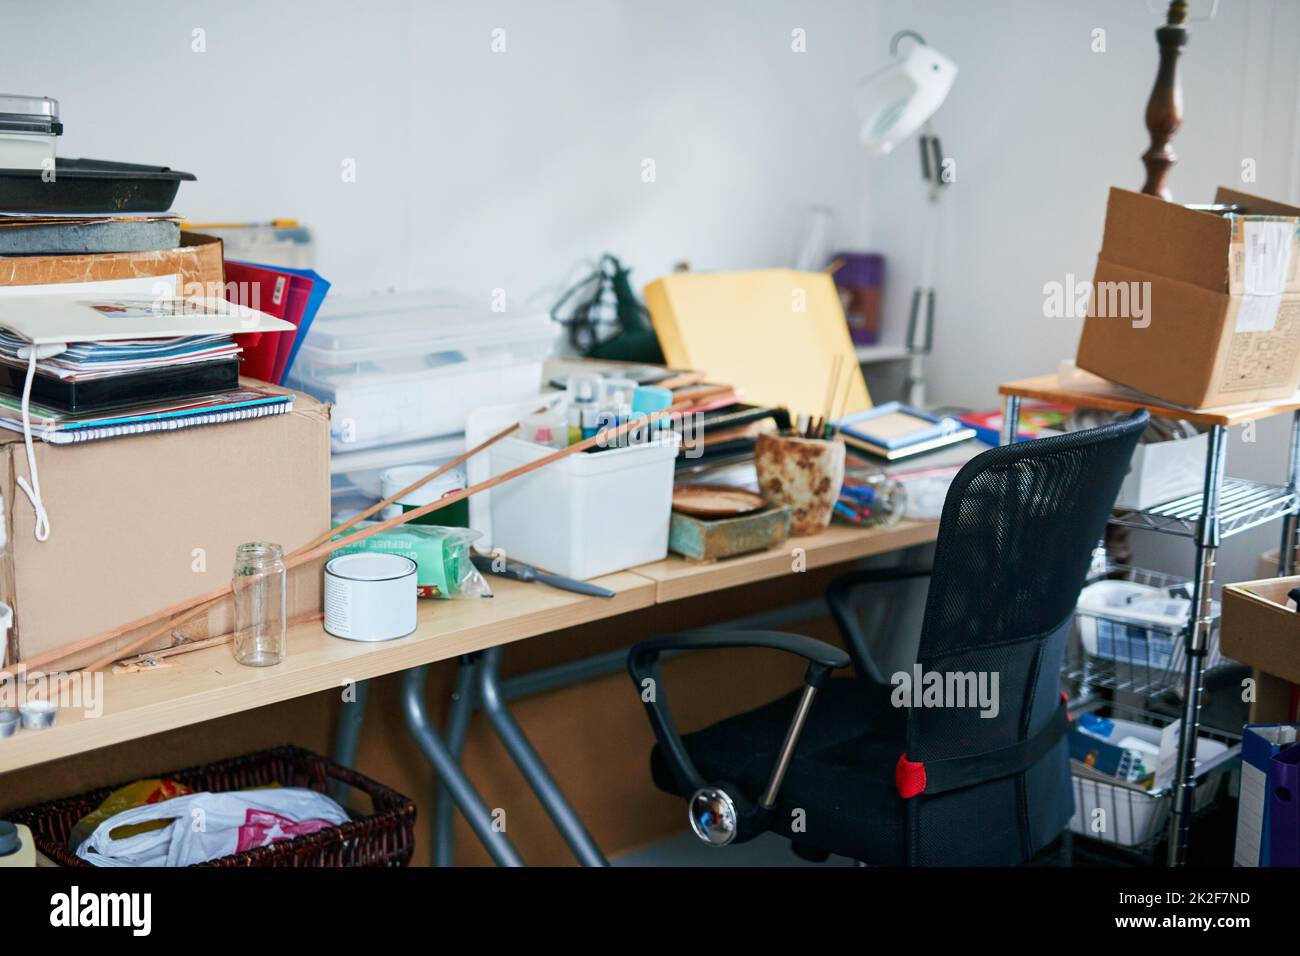 This room needs a clean. Shot of a messy room needing cleaning. Stock Photo